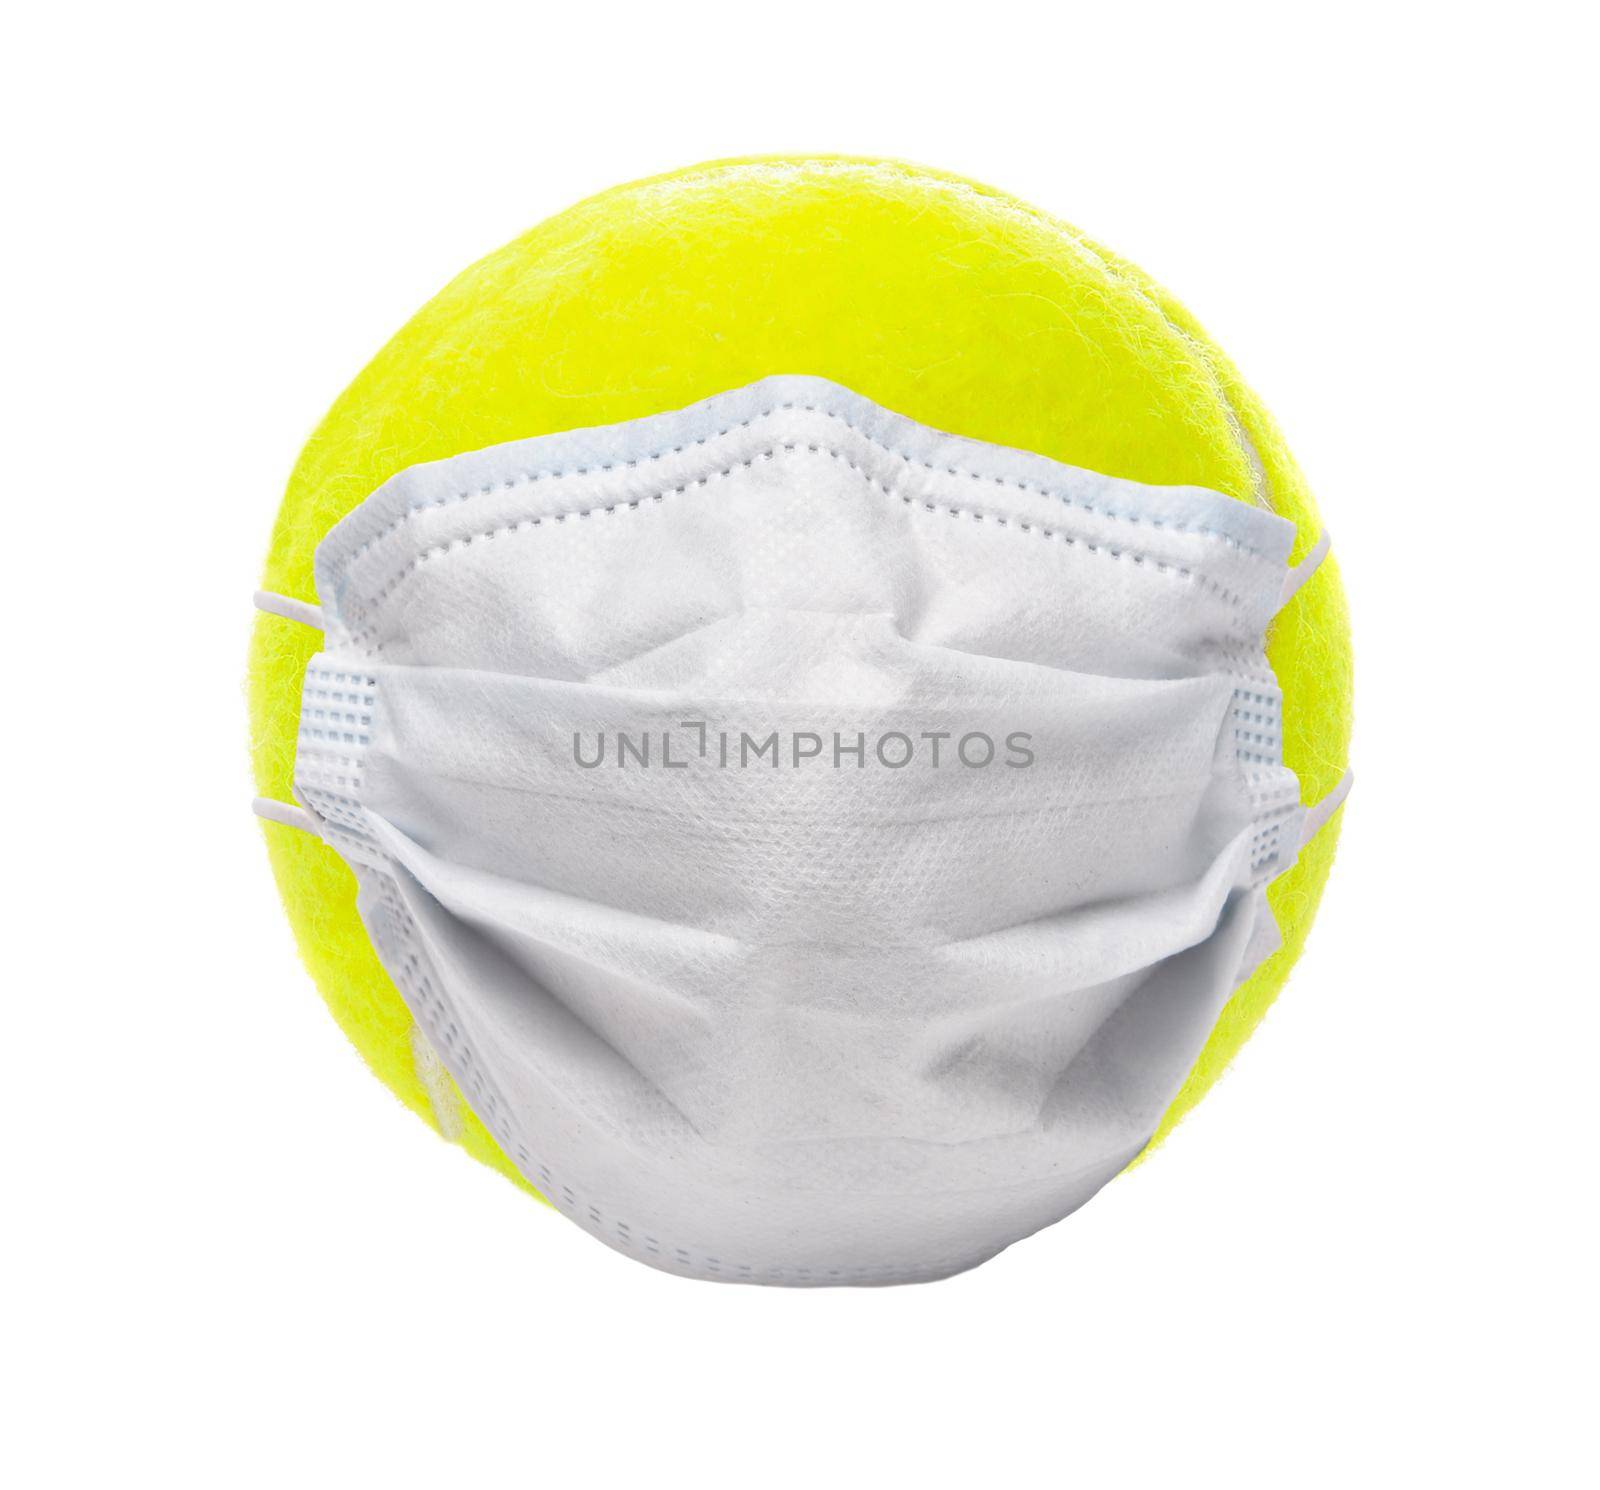 Covid-19 and Sports Concept. A tennis ball with Surgical Mask, isolated on white.